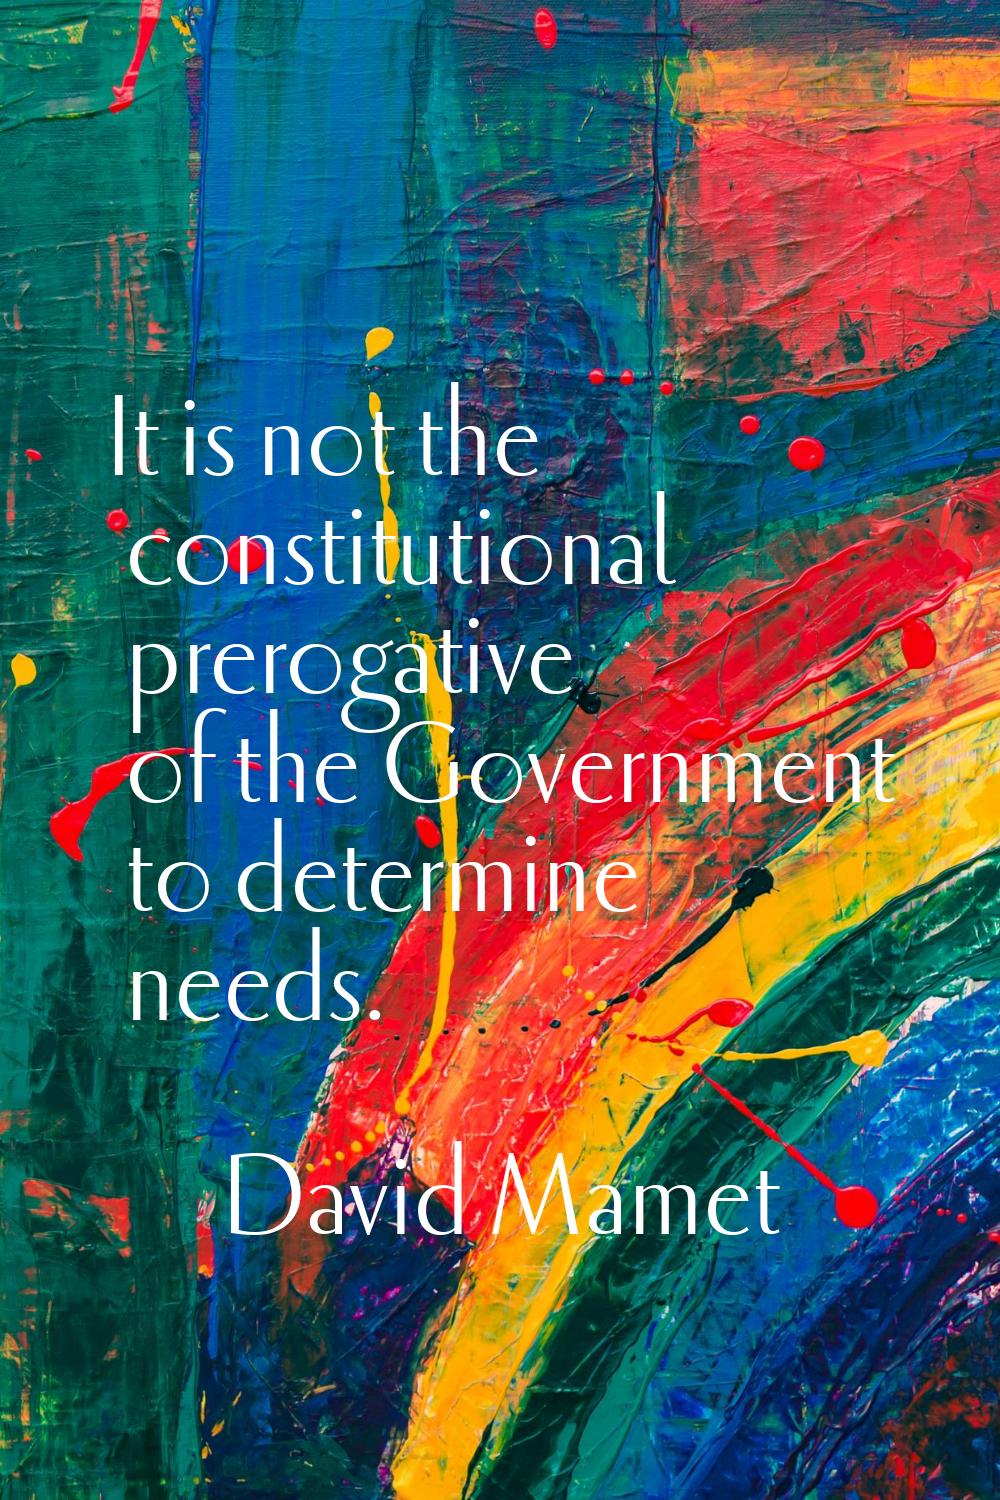 It is not the constitutional prerogative of the Government to determine needs.